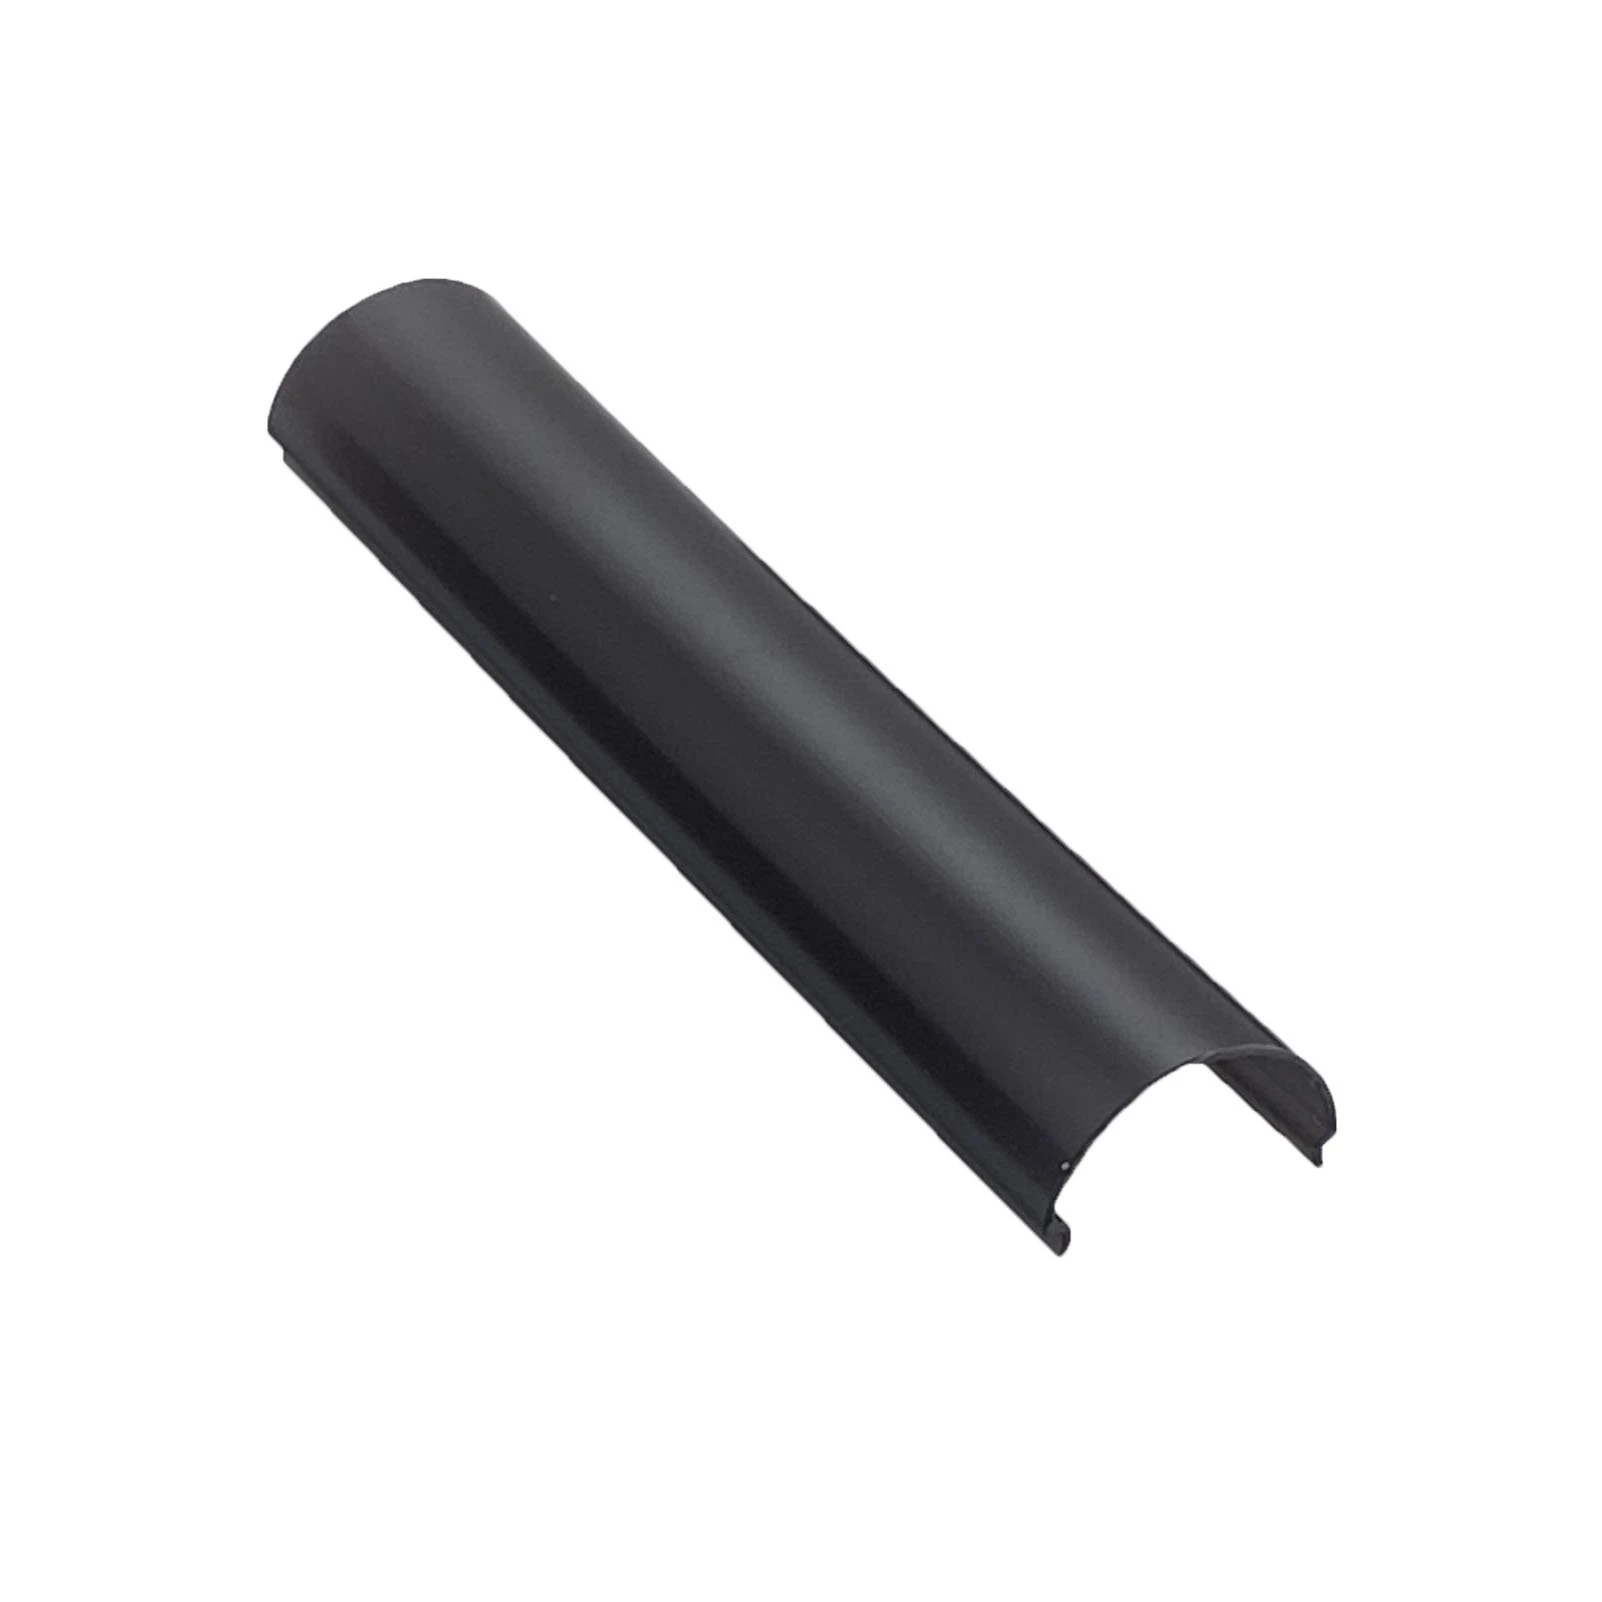 MOSS-ALQ-3015B - Rounded - Cover Only - Black - 2.44 Meter